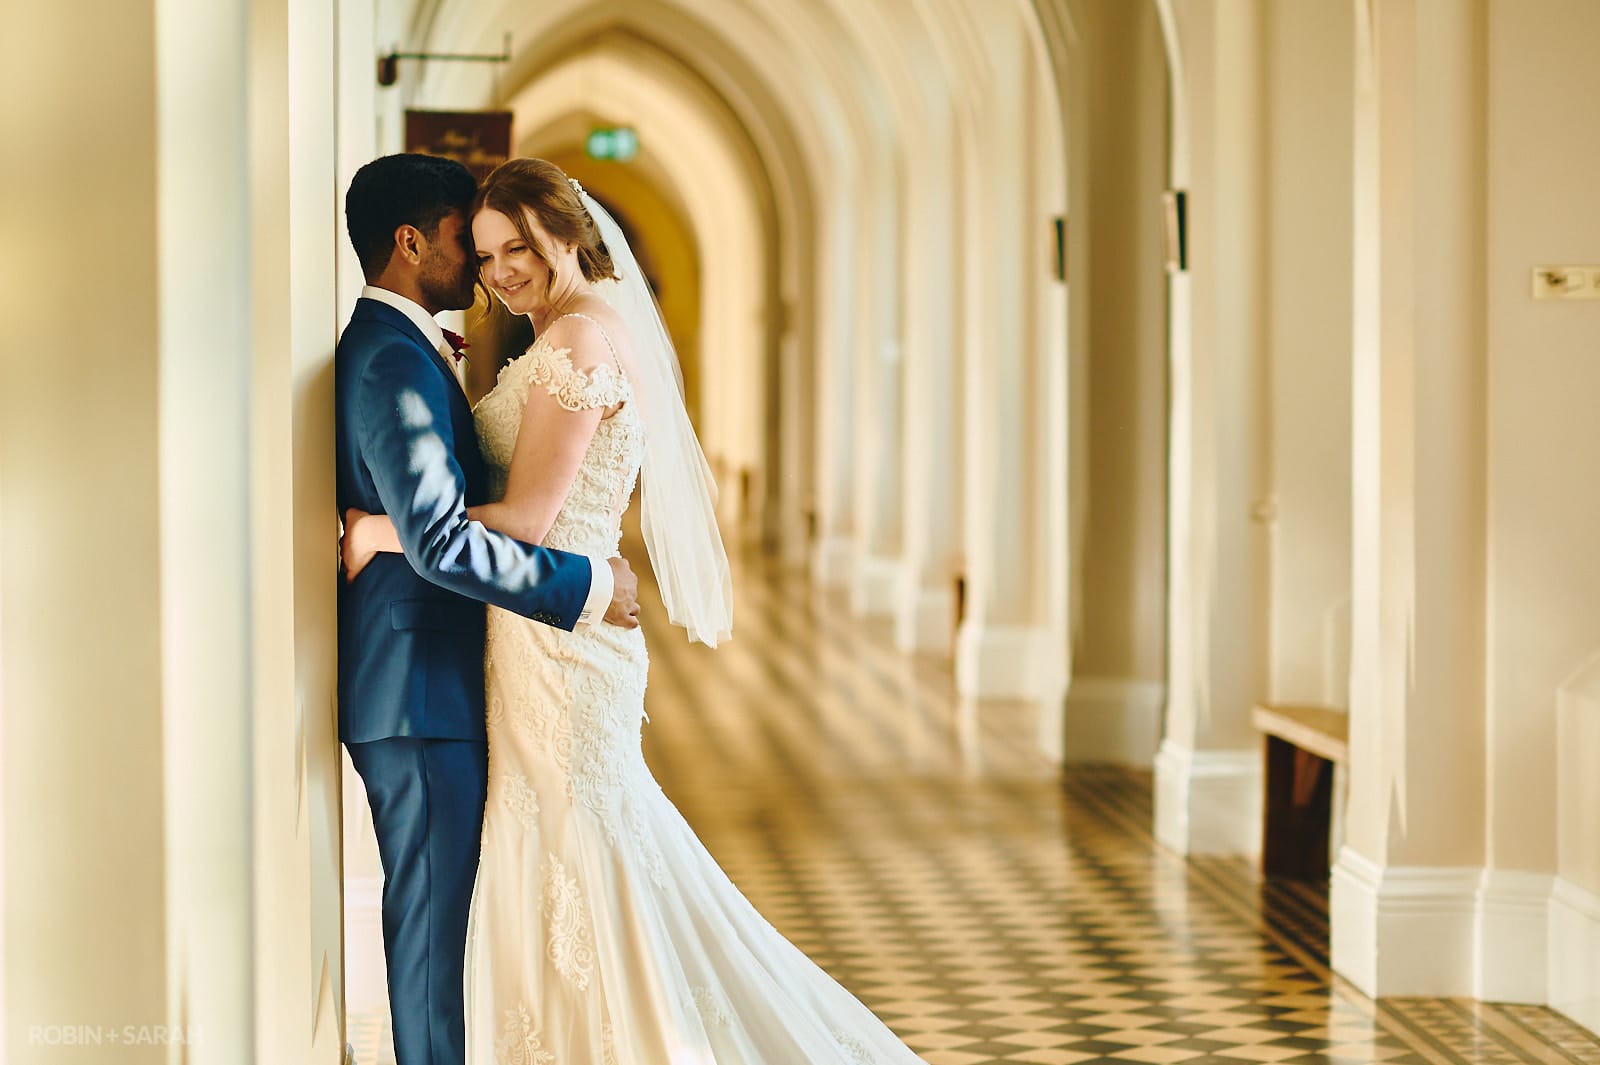 Bride and groom share a quiet moment together in cloister corridor at Stanbrook Abbey